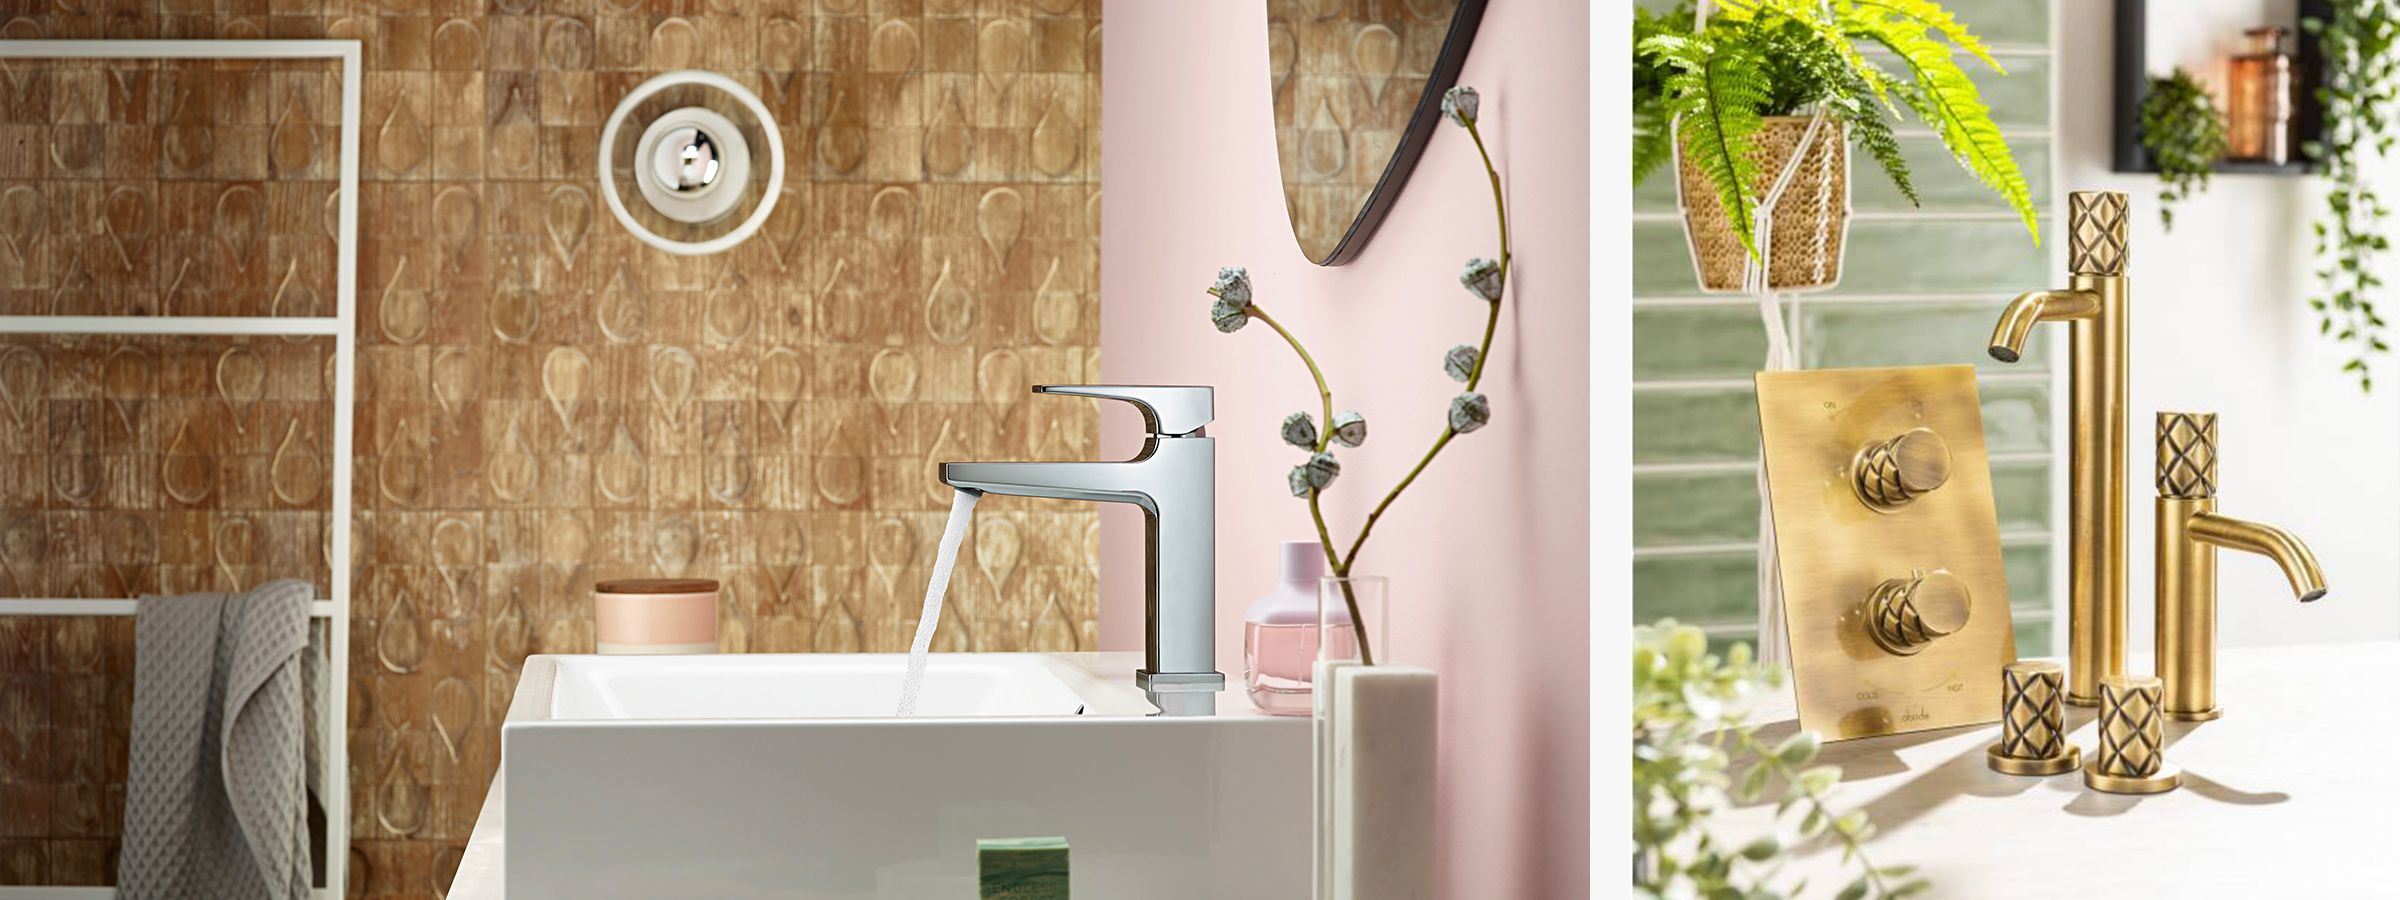 Hansgrohe & Abode